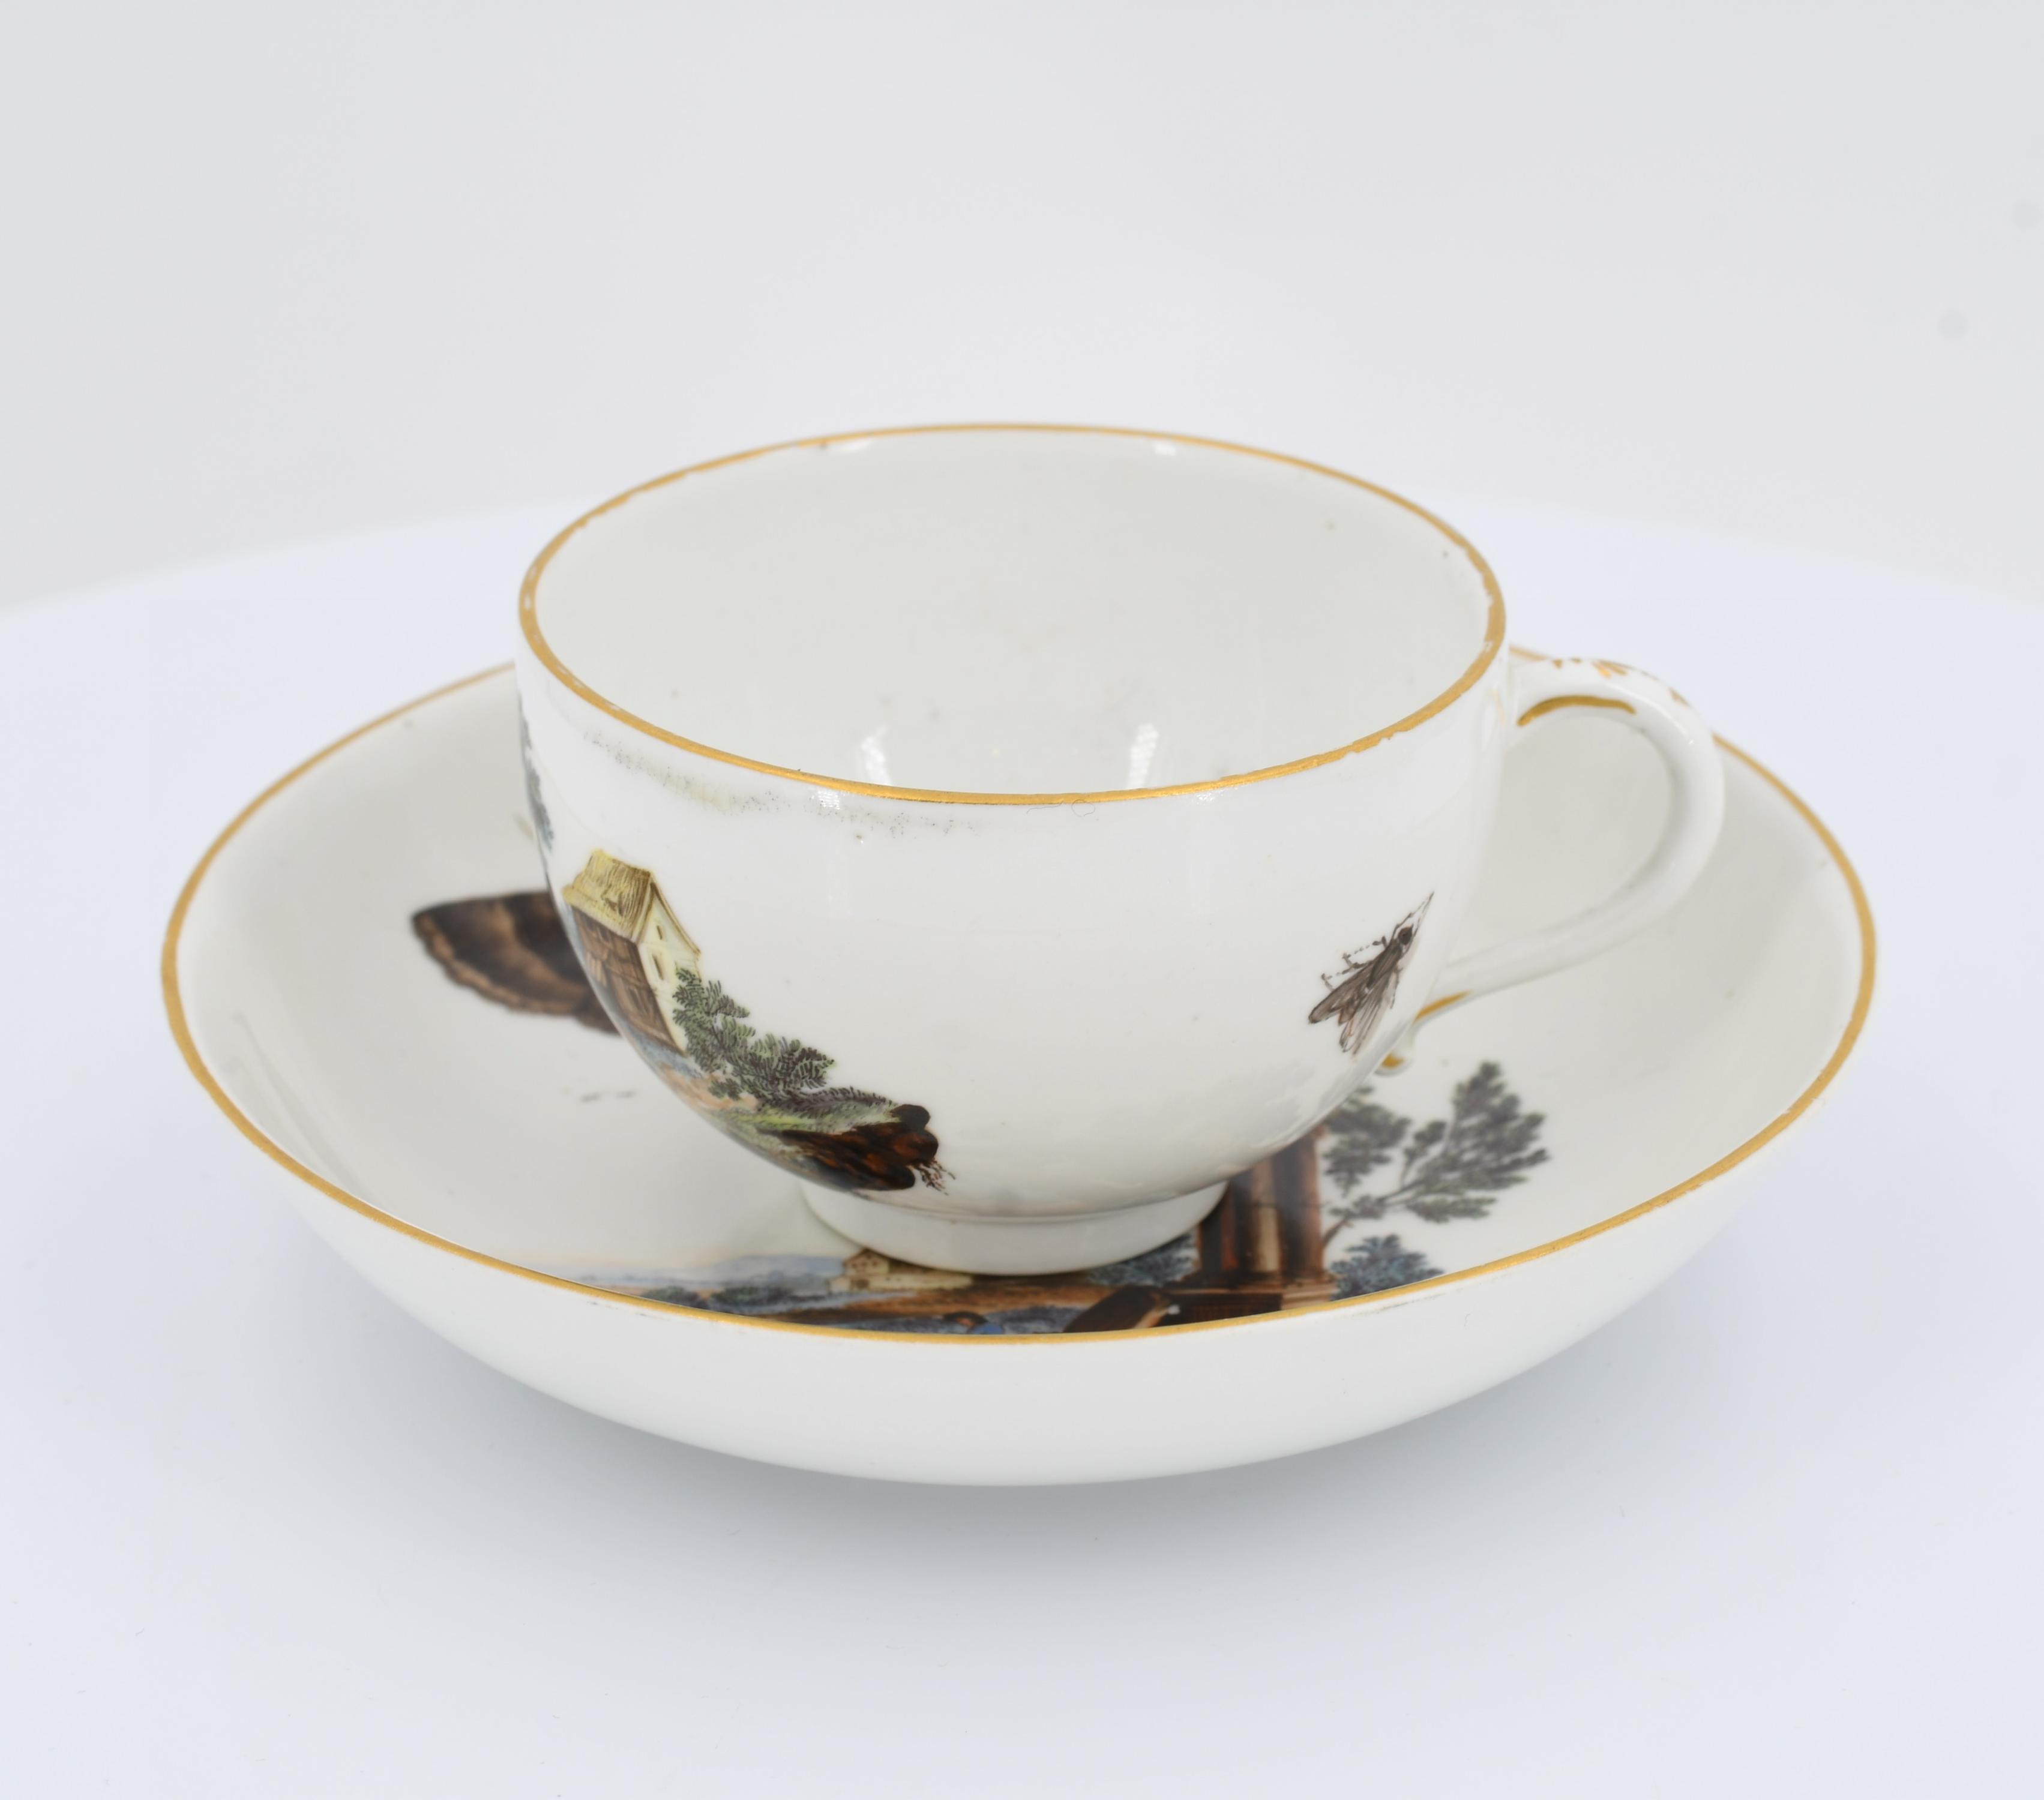 Cup and saucer with rural scenes and insects - Image 2 of 7